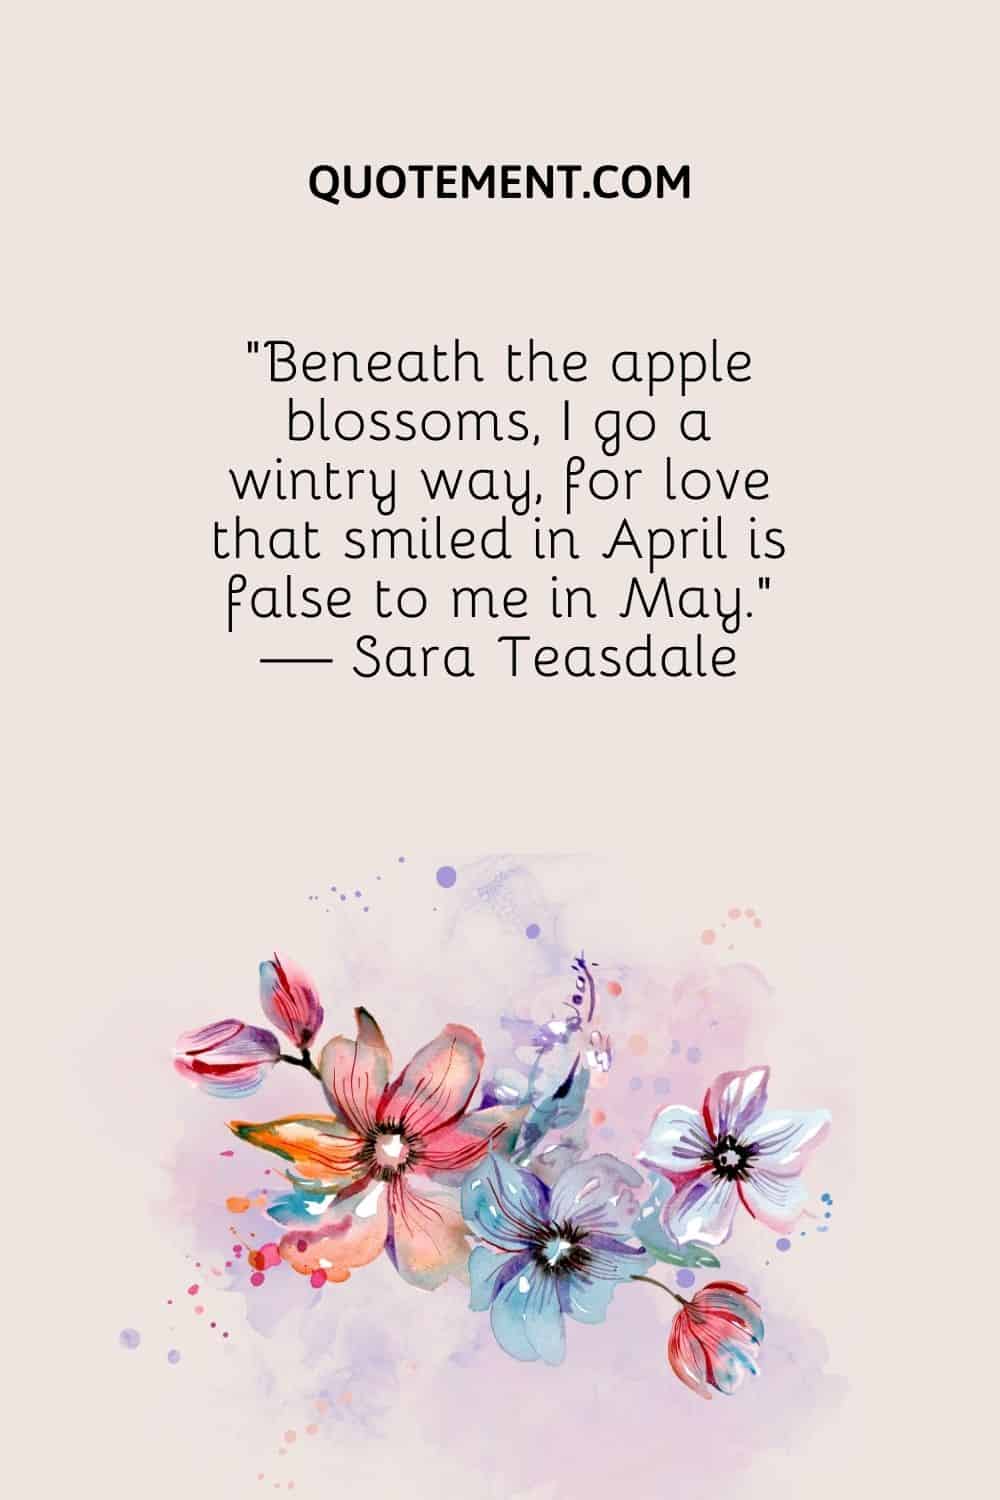 “Beneath the apple blossoms, I go a wintry way, for love that smiled in April is false to me in May.” — Sara Teasdale